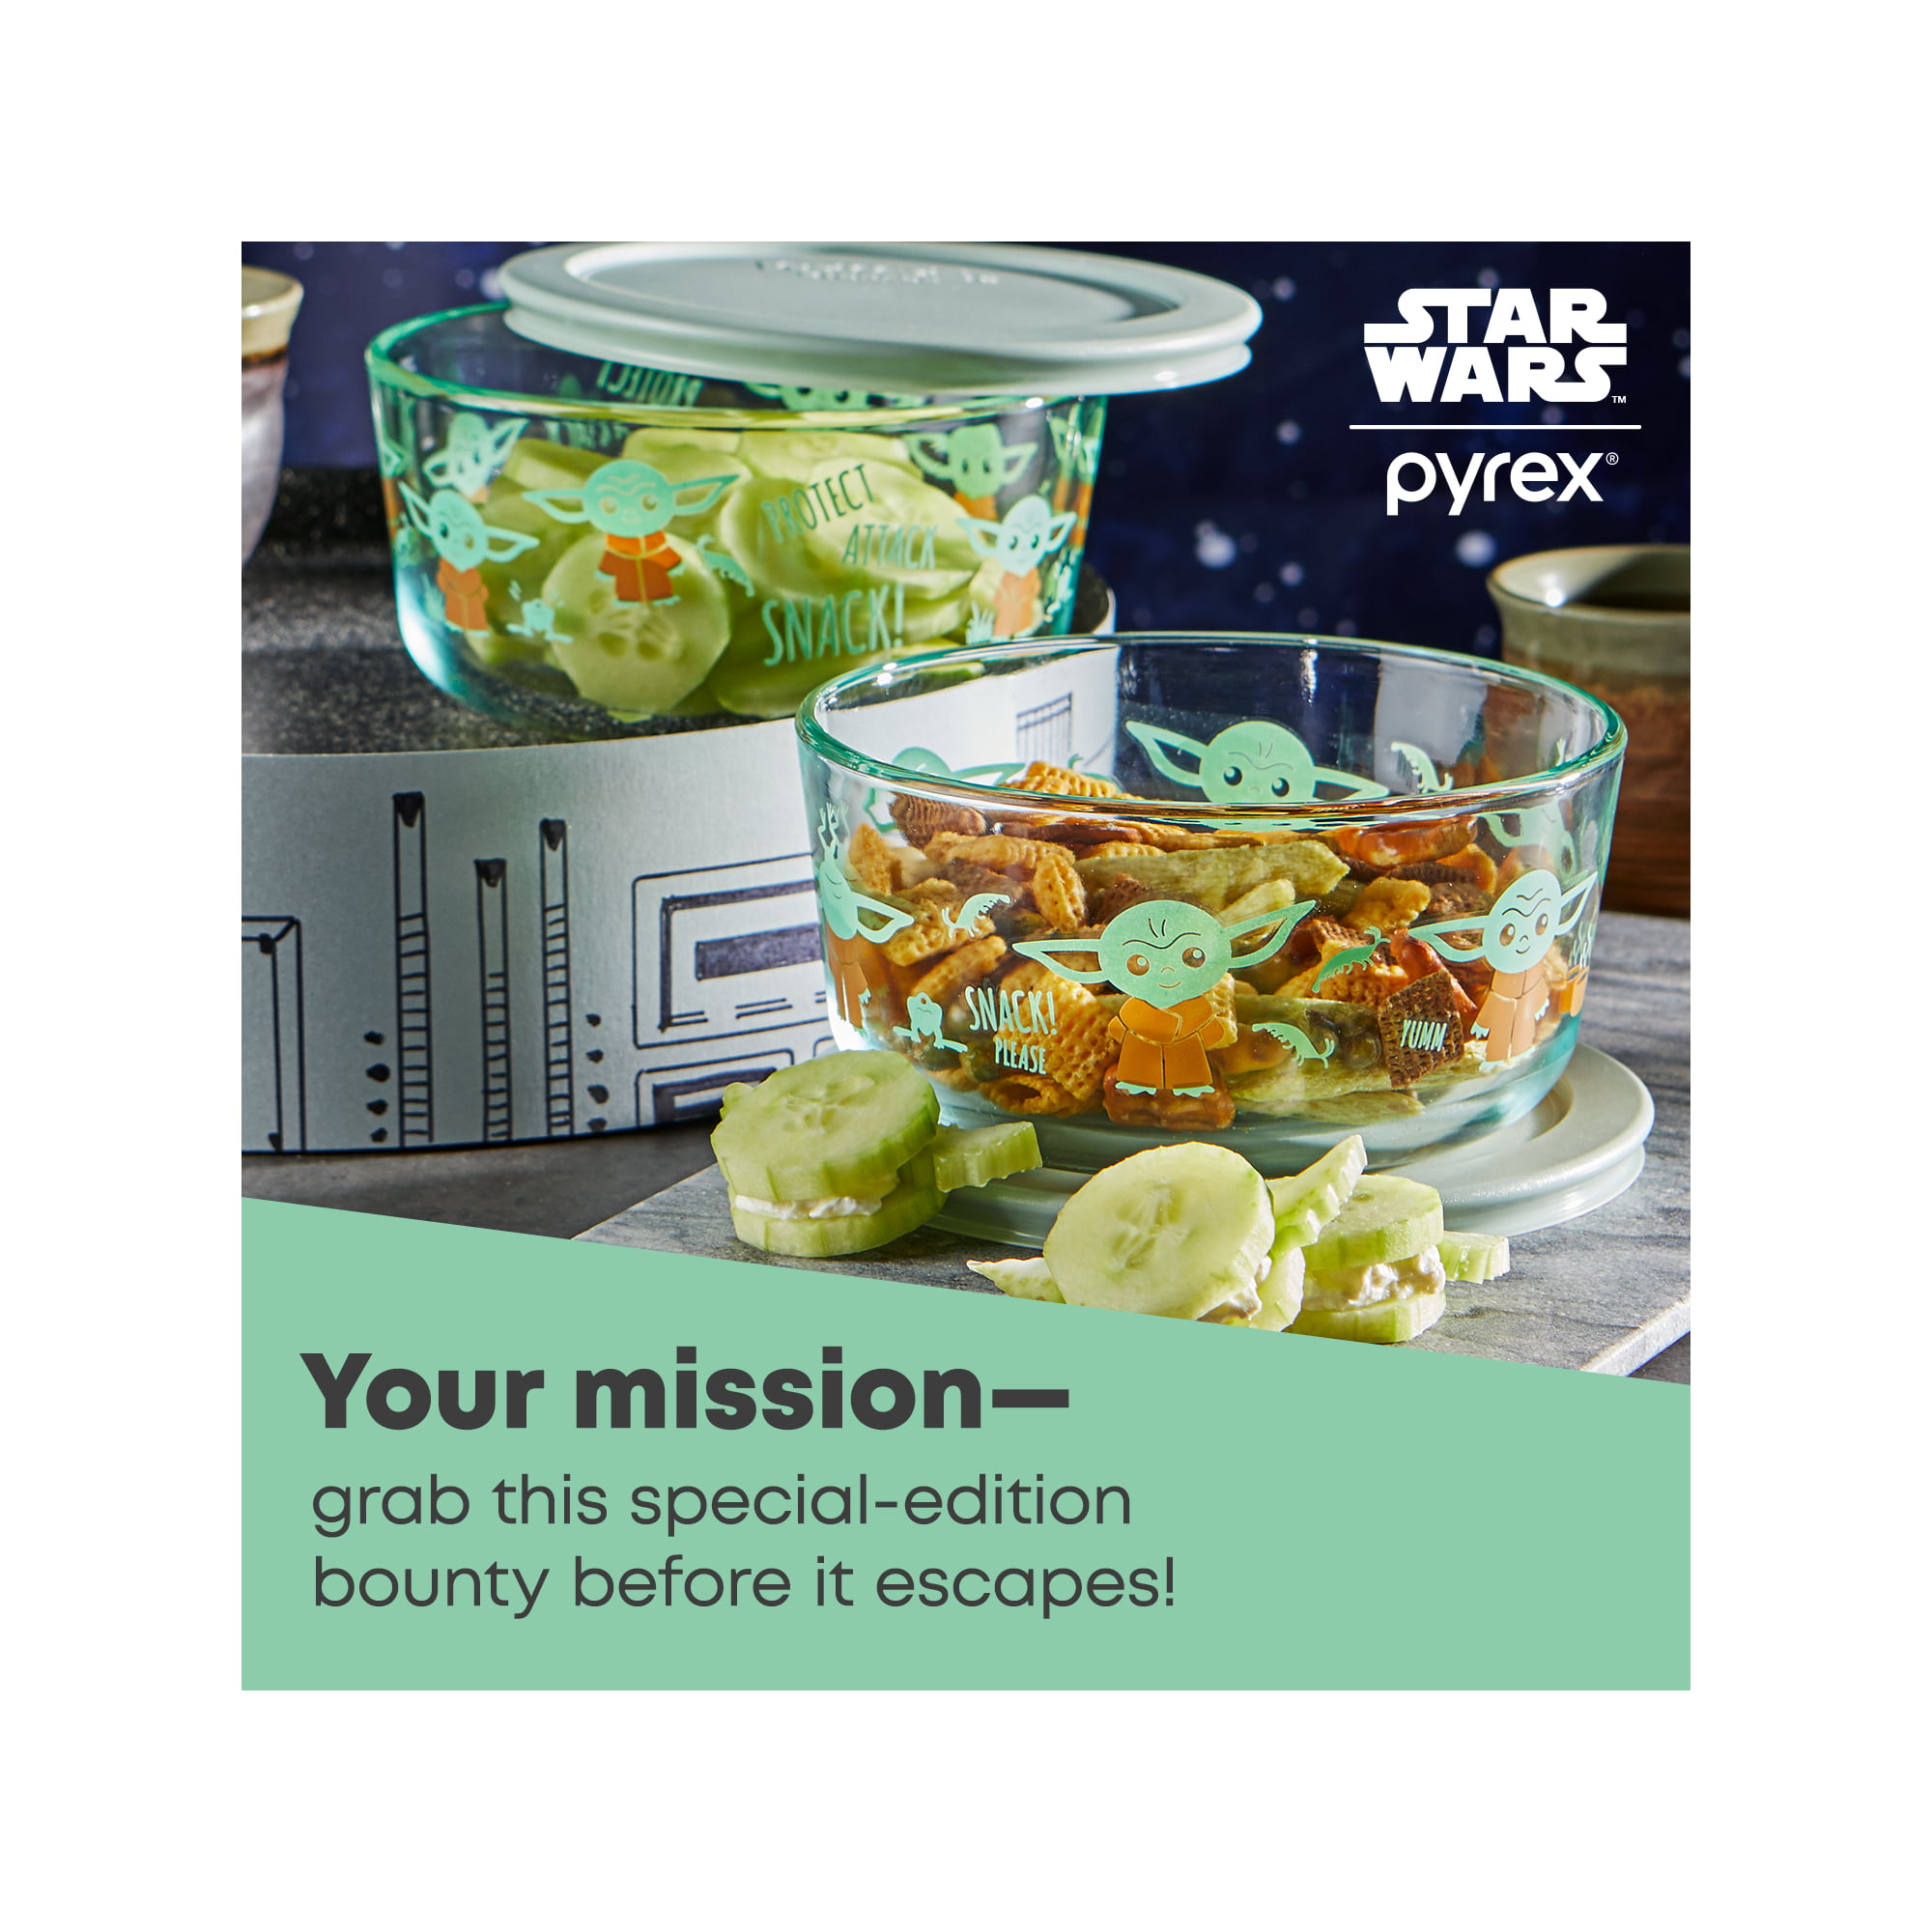 Pyrex 4-Cup Decorated Glass Storage: Star Wars - The Child, Hello